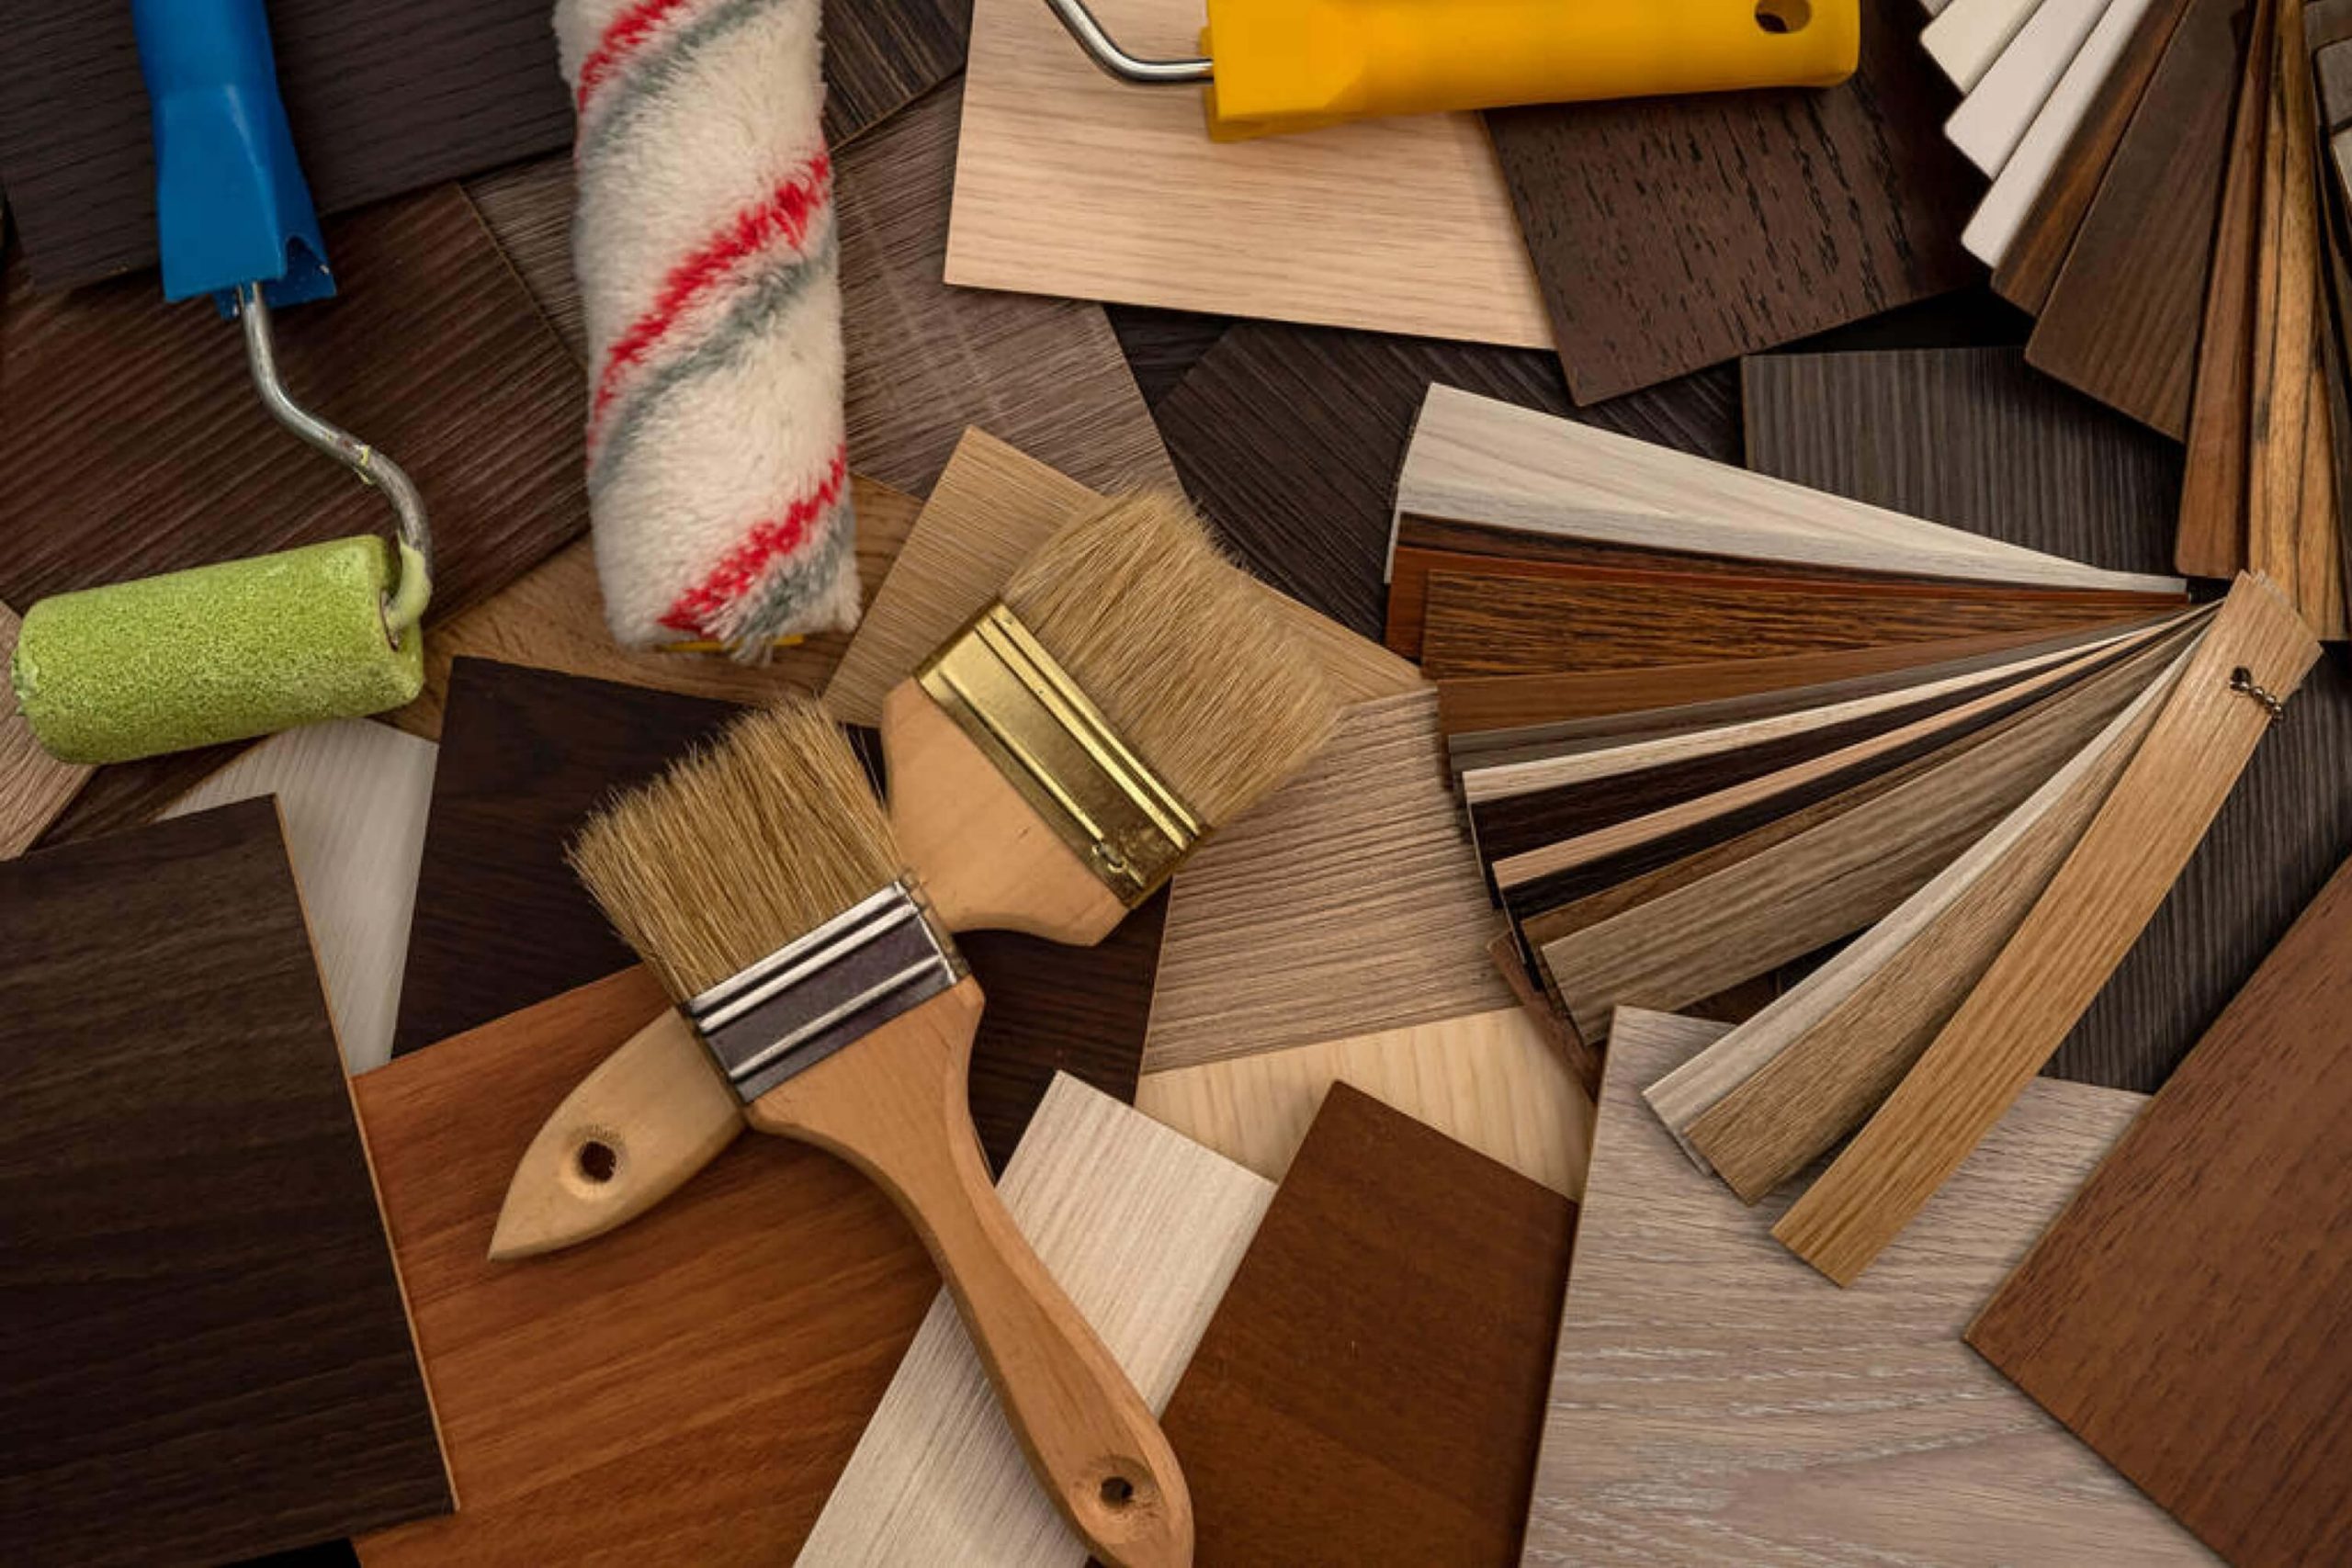 Things to Know Before Getting Paint Off Laminate Flooring